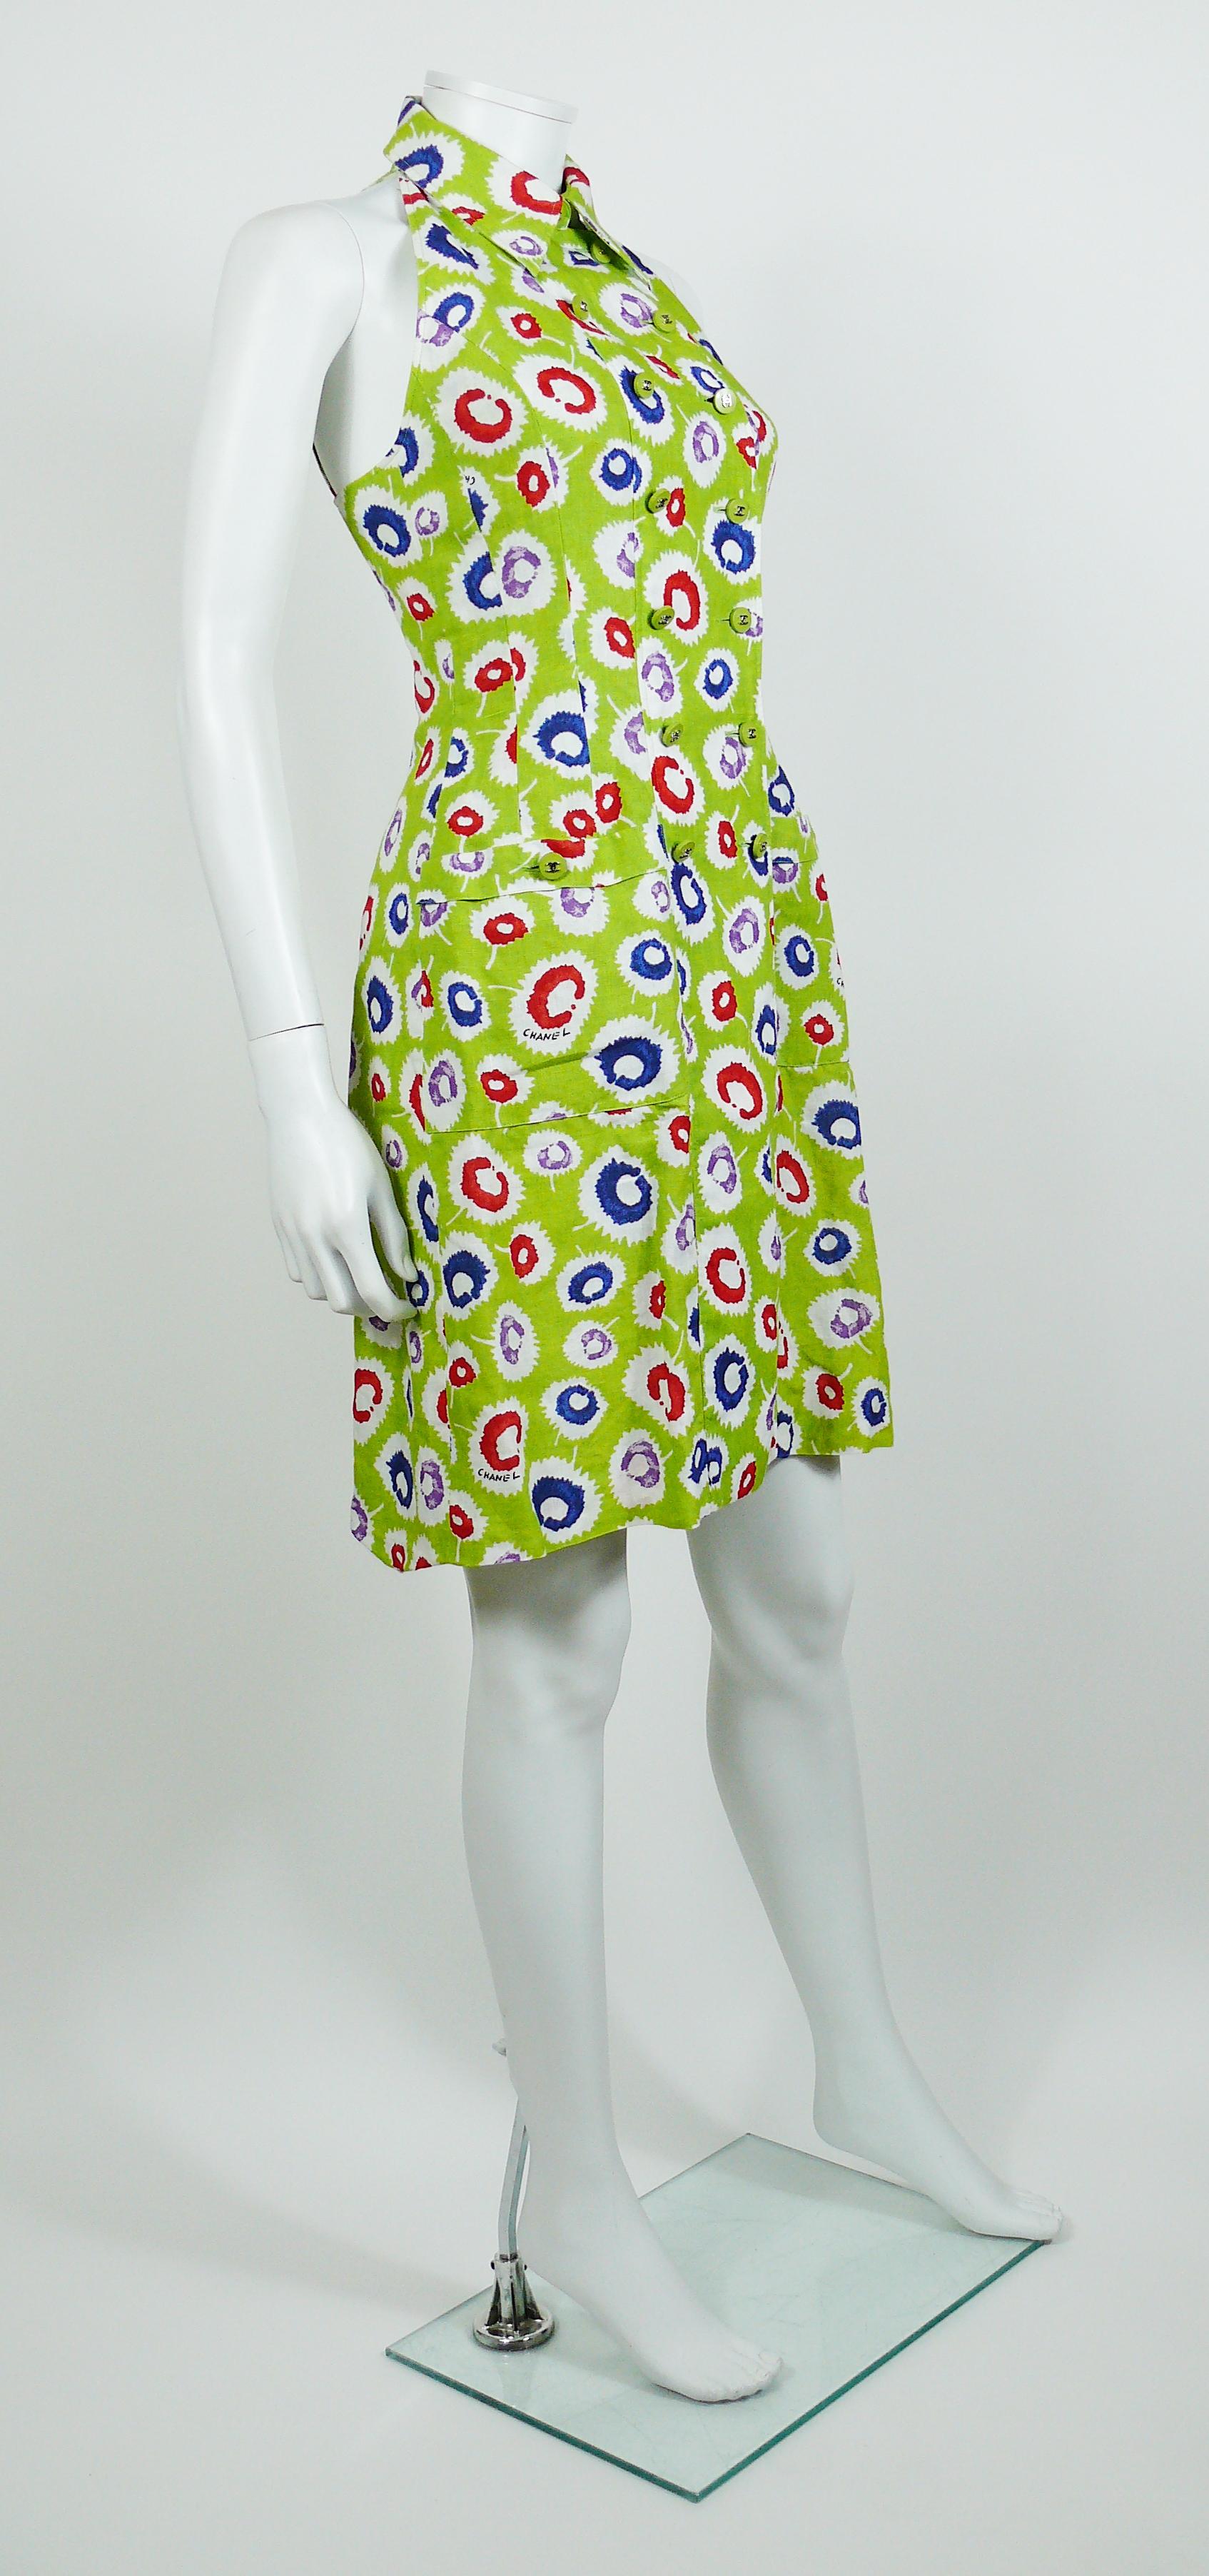 Chanel Boutique vintage multicolored linen dress.

Summer 1997 Collection.

This dress features :
- Abstract muticolored flower print with Chanel signature on a green background.
- Button front.
- Green resin buttons with silver toned CC logo.
- Two